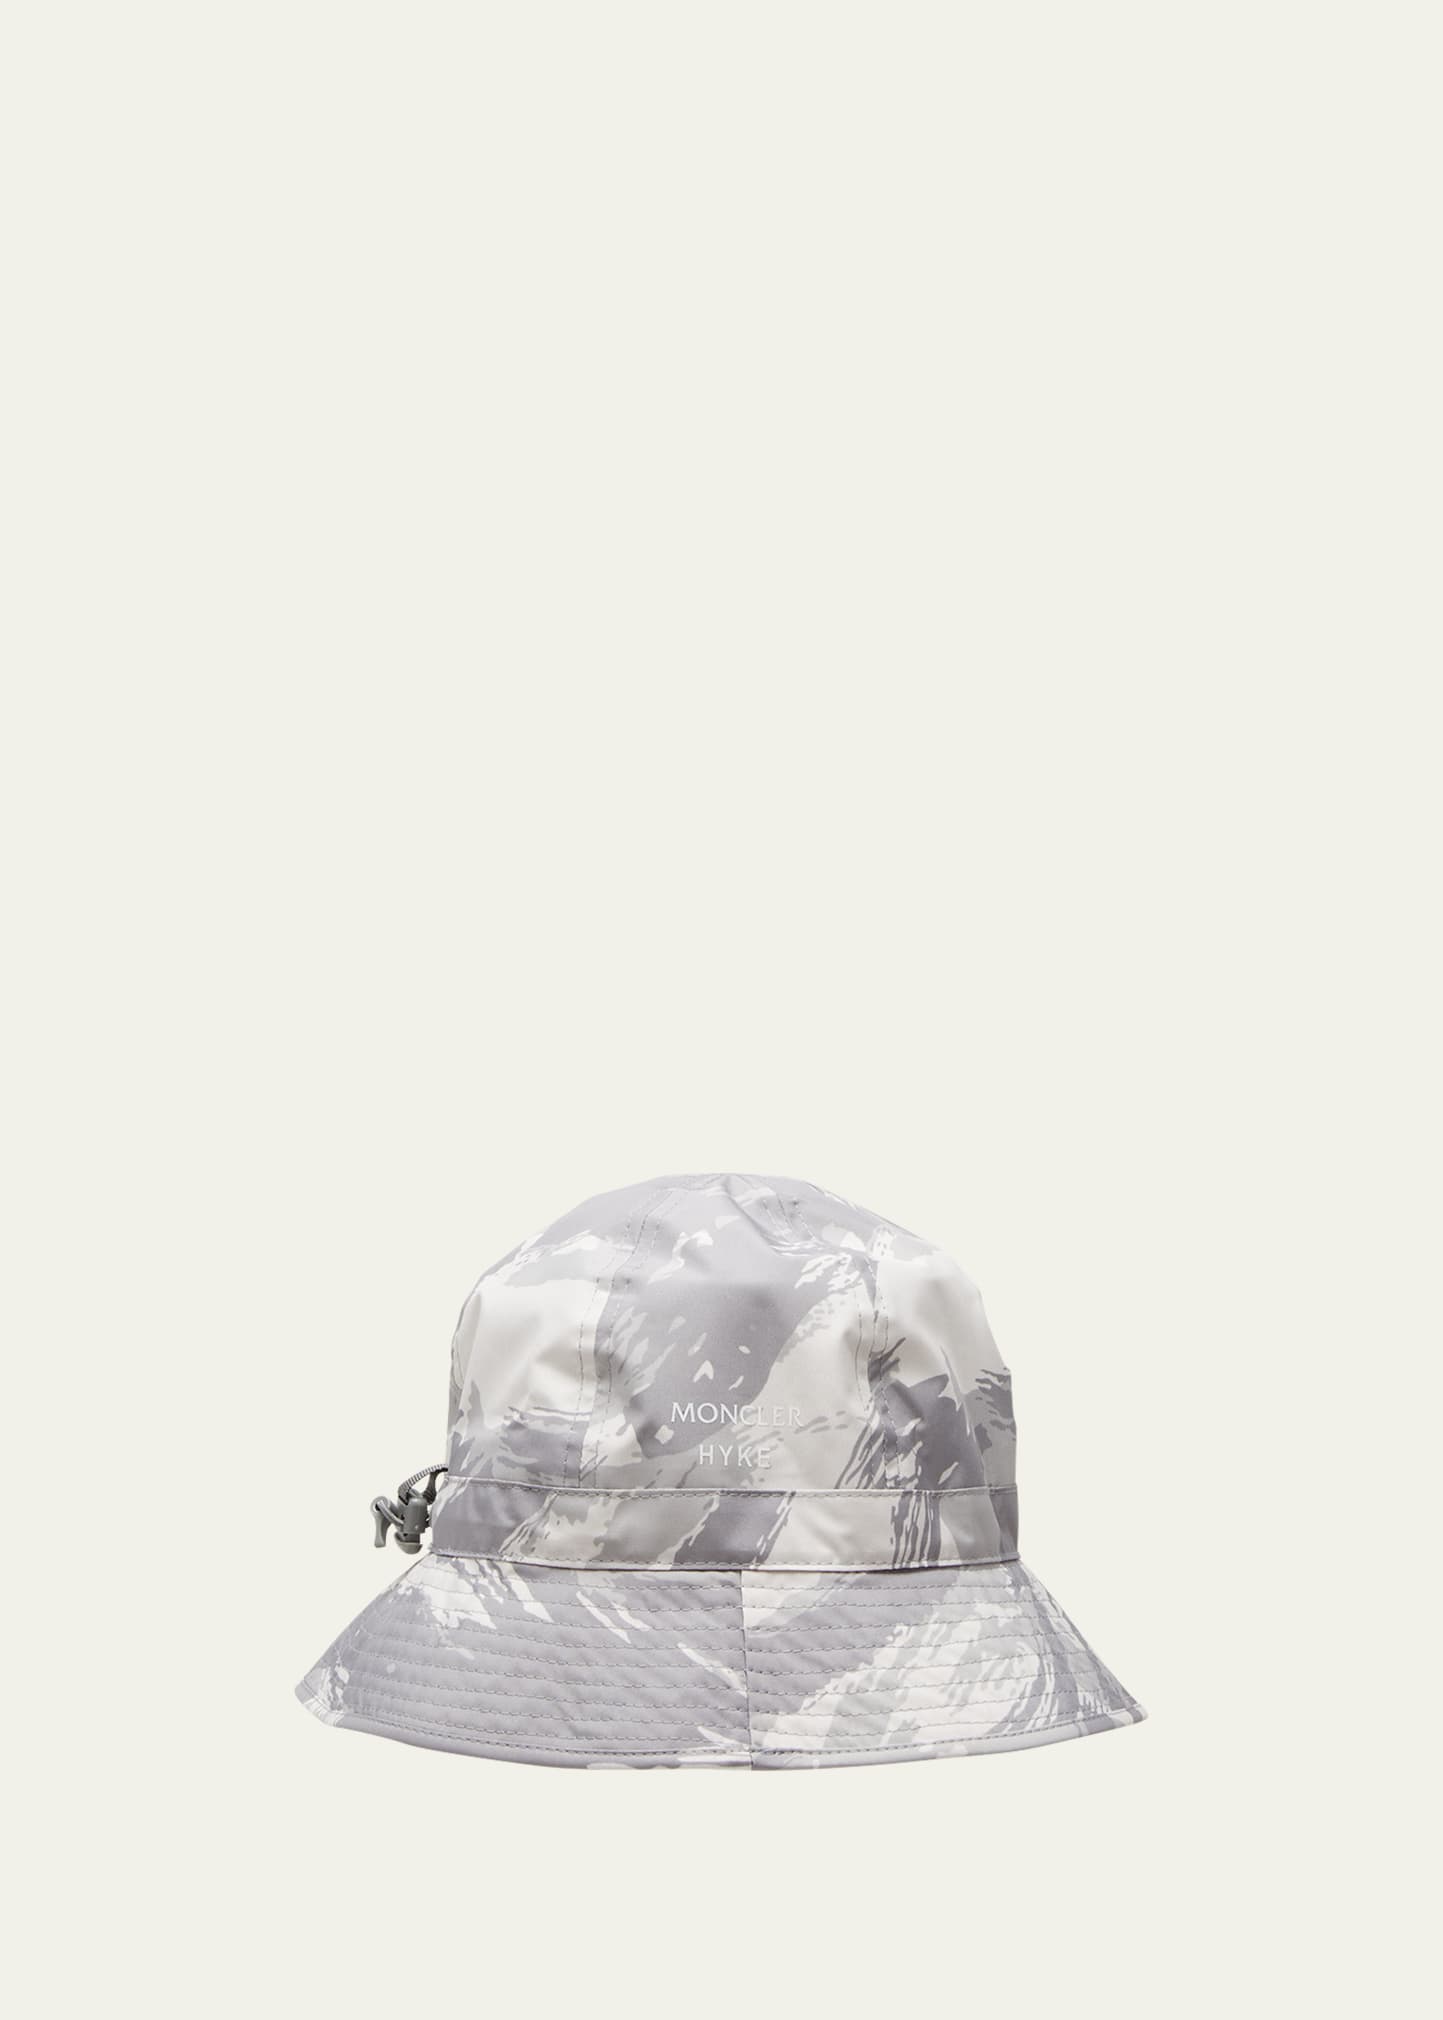 MONCLER GENIUS PRINTED BUCKET HAT WITH DRAWCORD